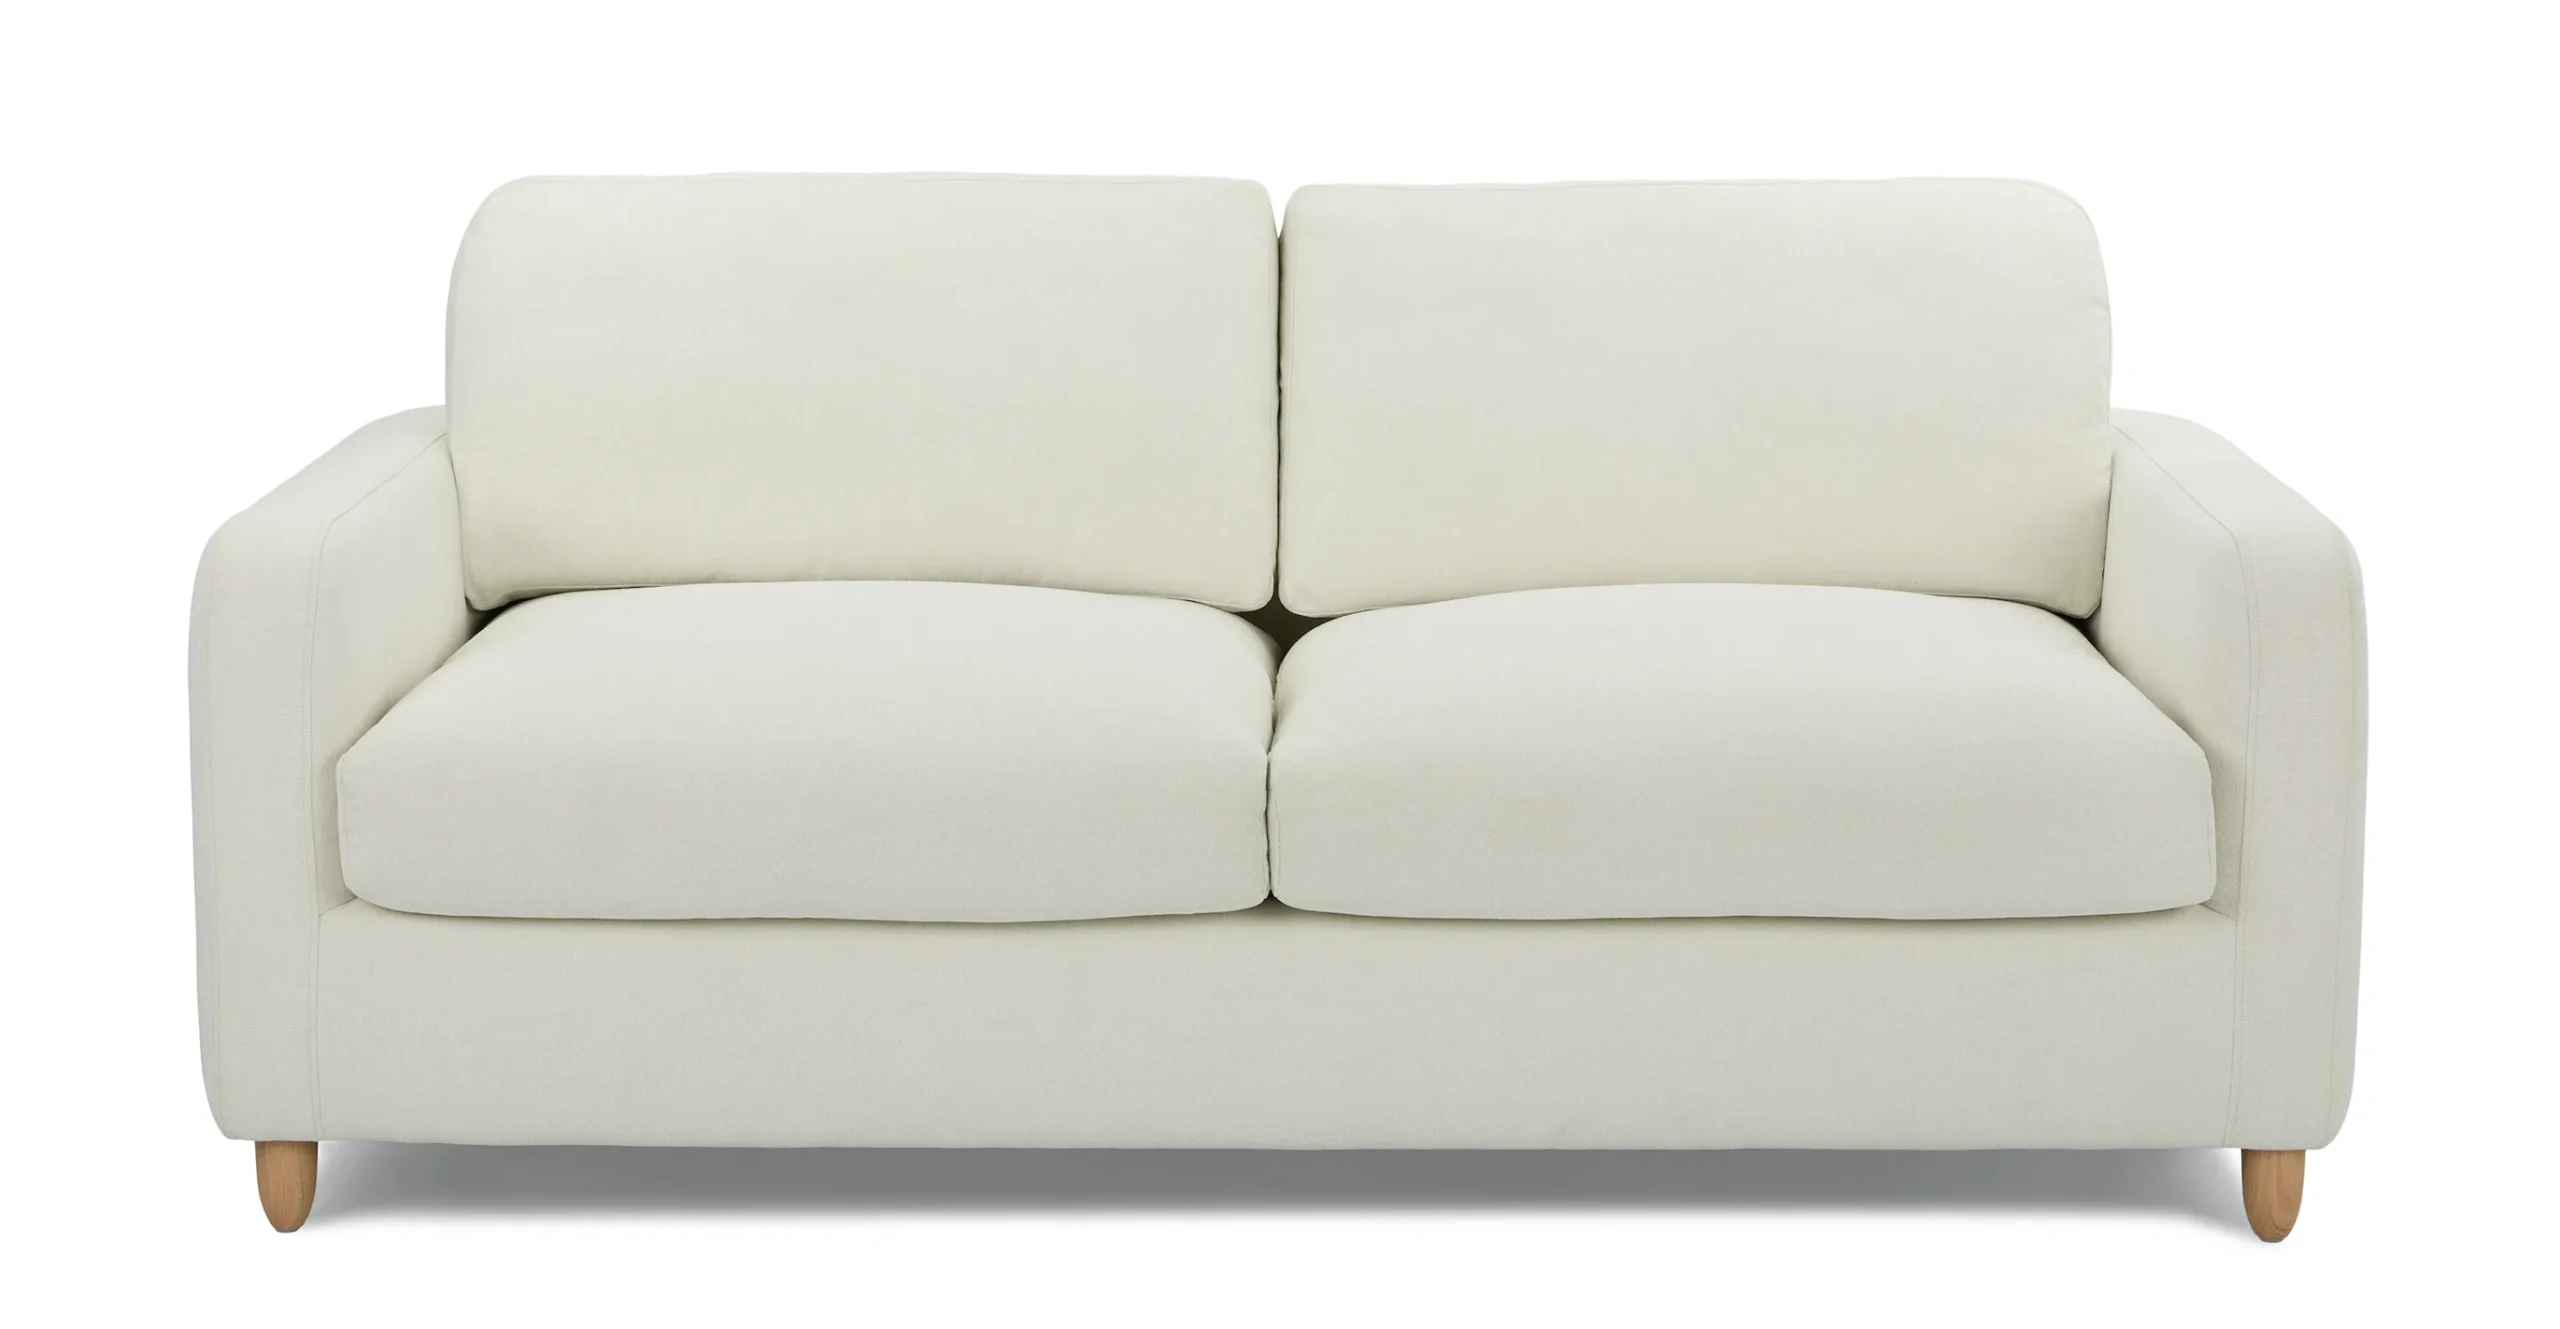 the gorgeous Vati sleeper sofa from Article